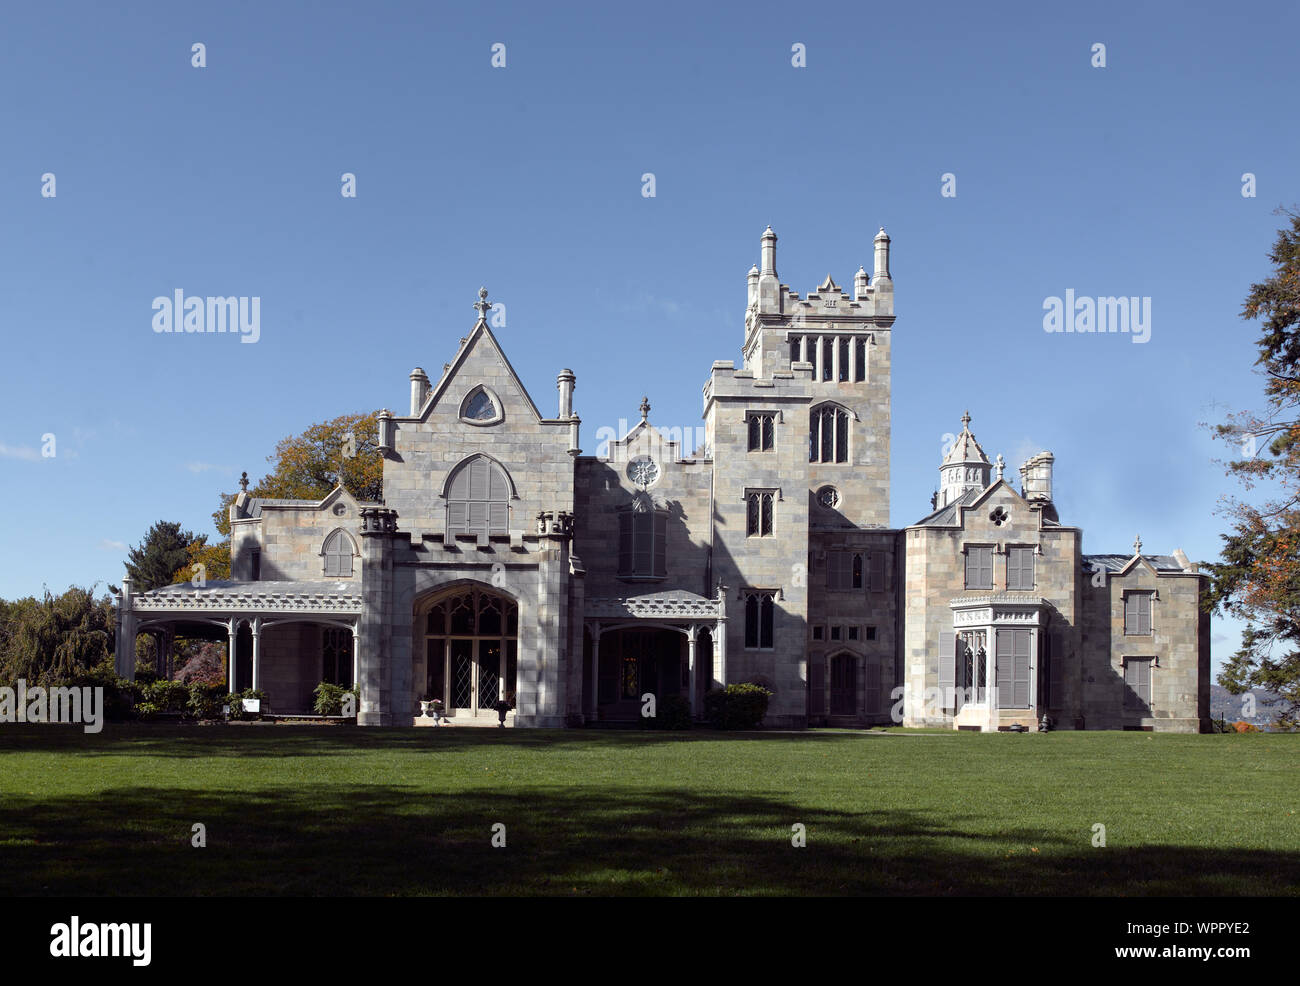 Lyndhurst, also known as Jay Gould Estate, Tarrytown, New York Stock Photo